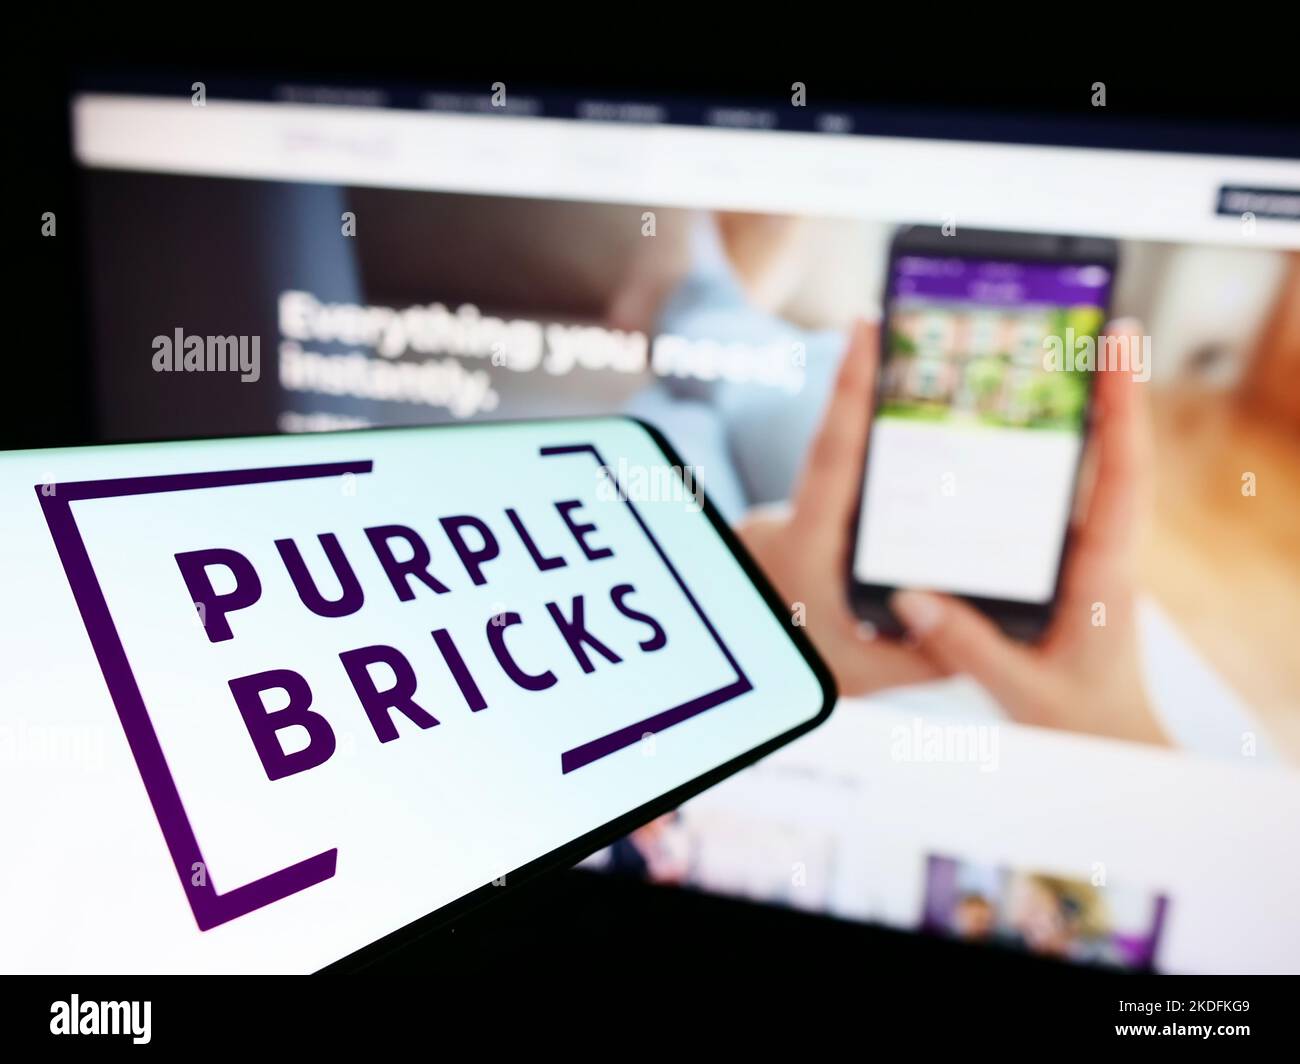 Smartphone with logo of real estate company Purplebricks Group plc on screen in front of business website. Focus on left of phone display. Stock Photo